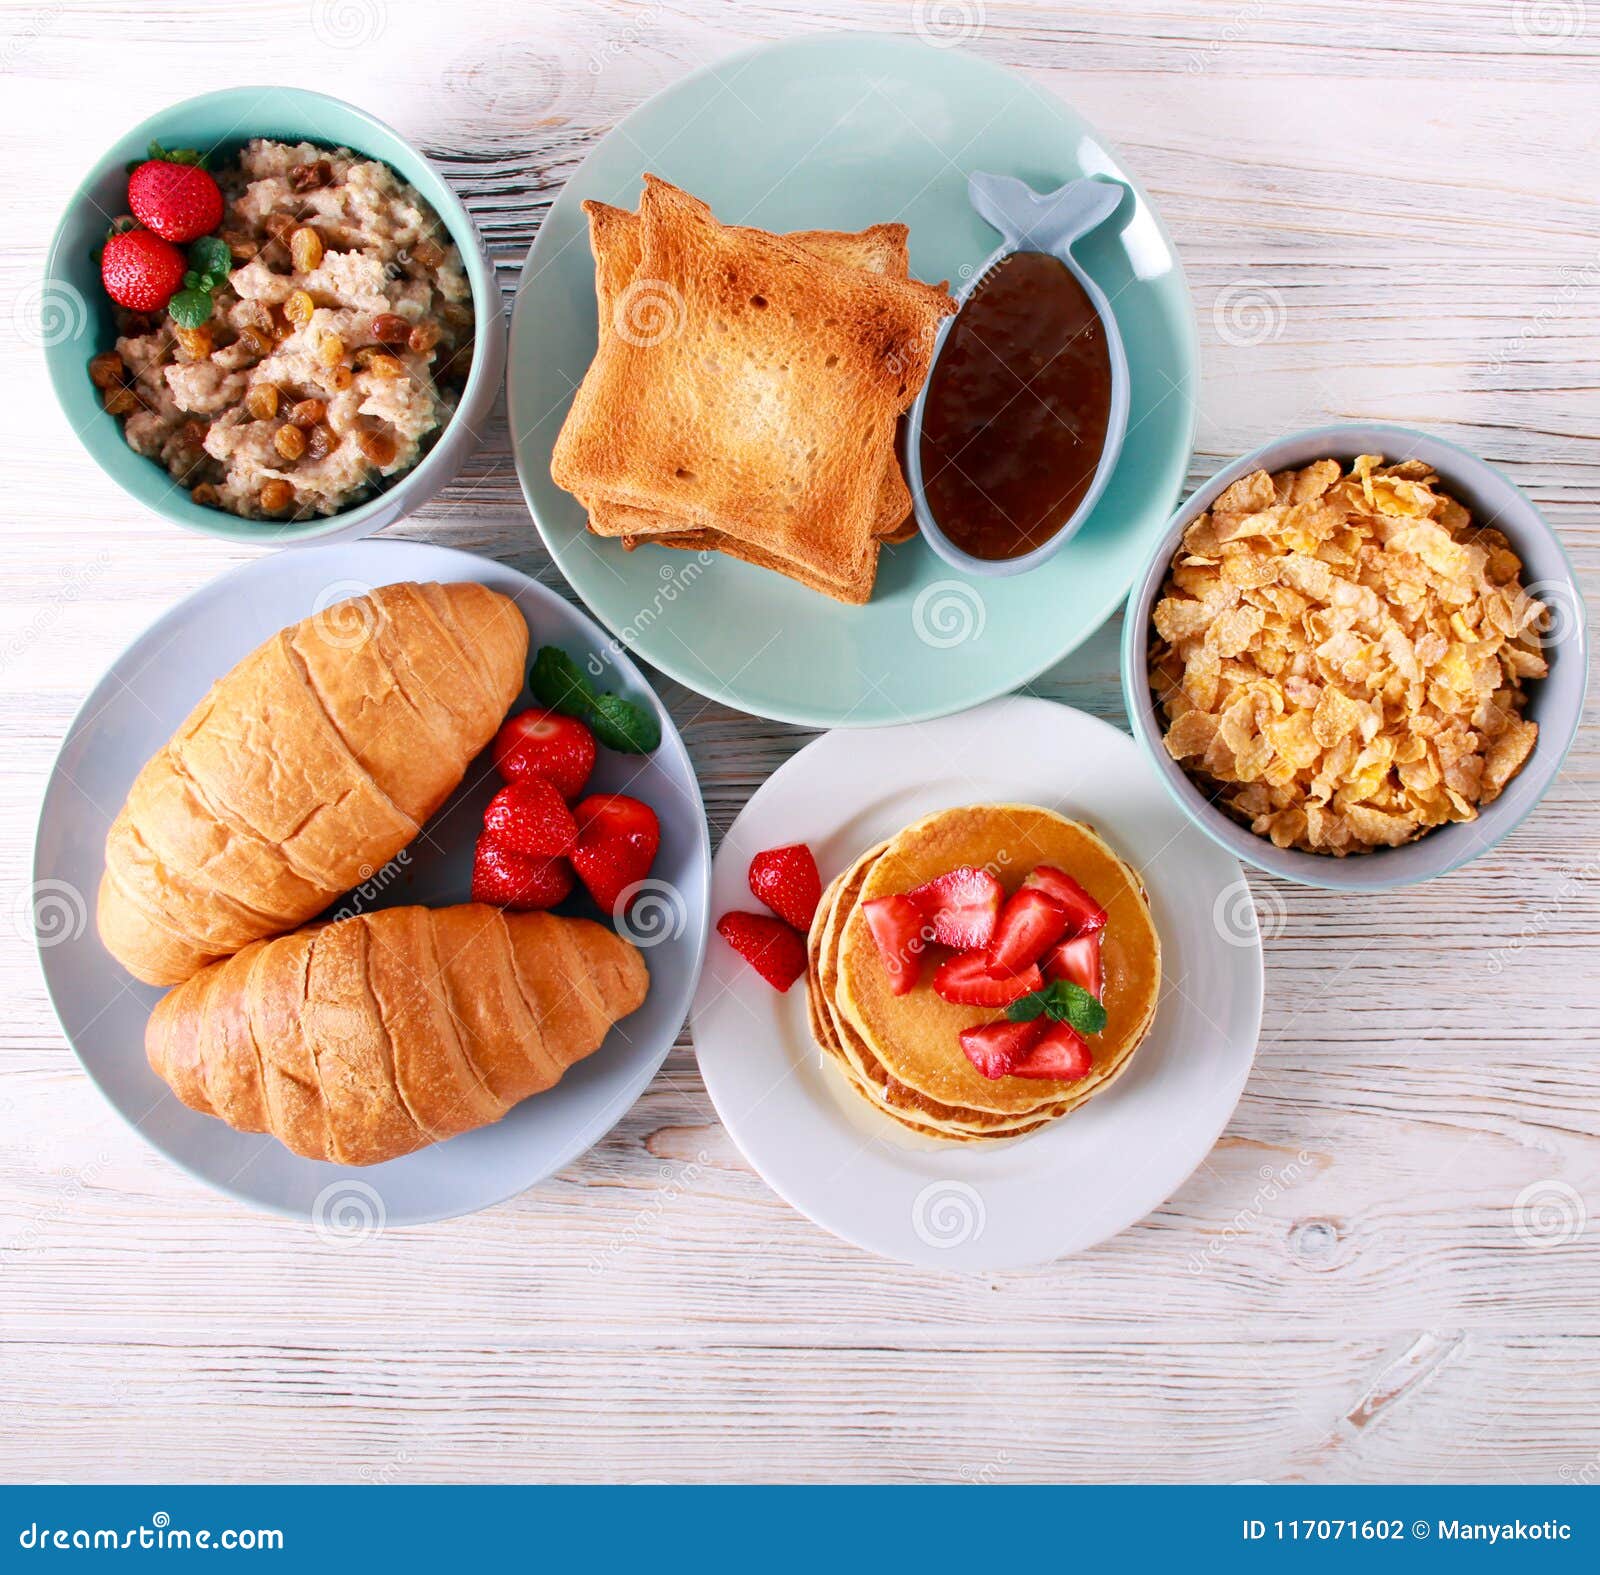 Sweet breakfasts on table stock photo. Image of wooden - 117071602